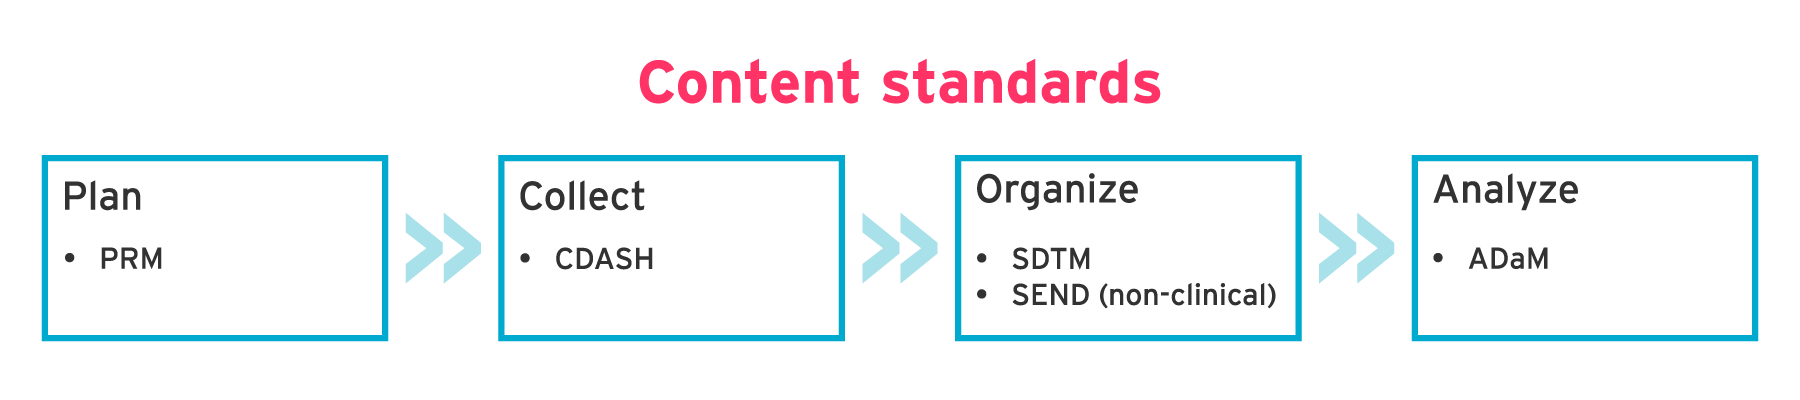 Content-standards-updated (1)